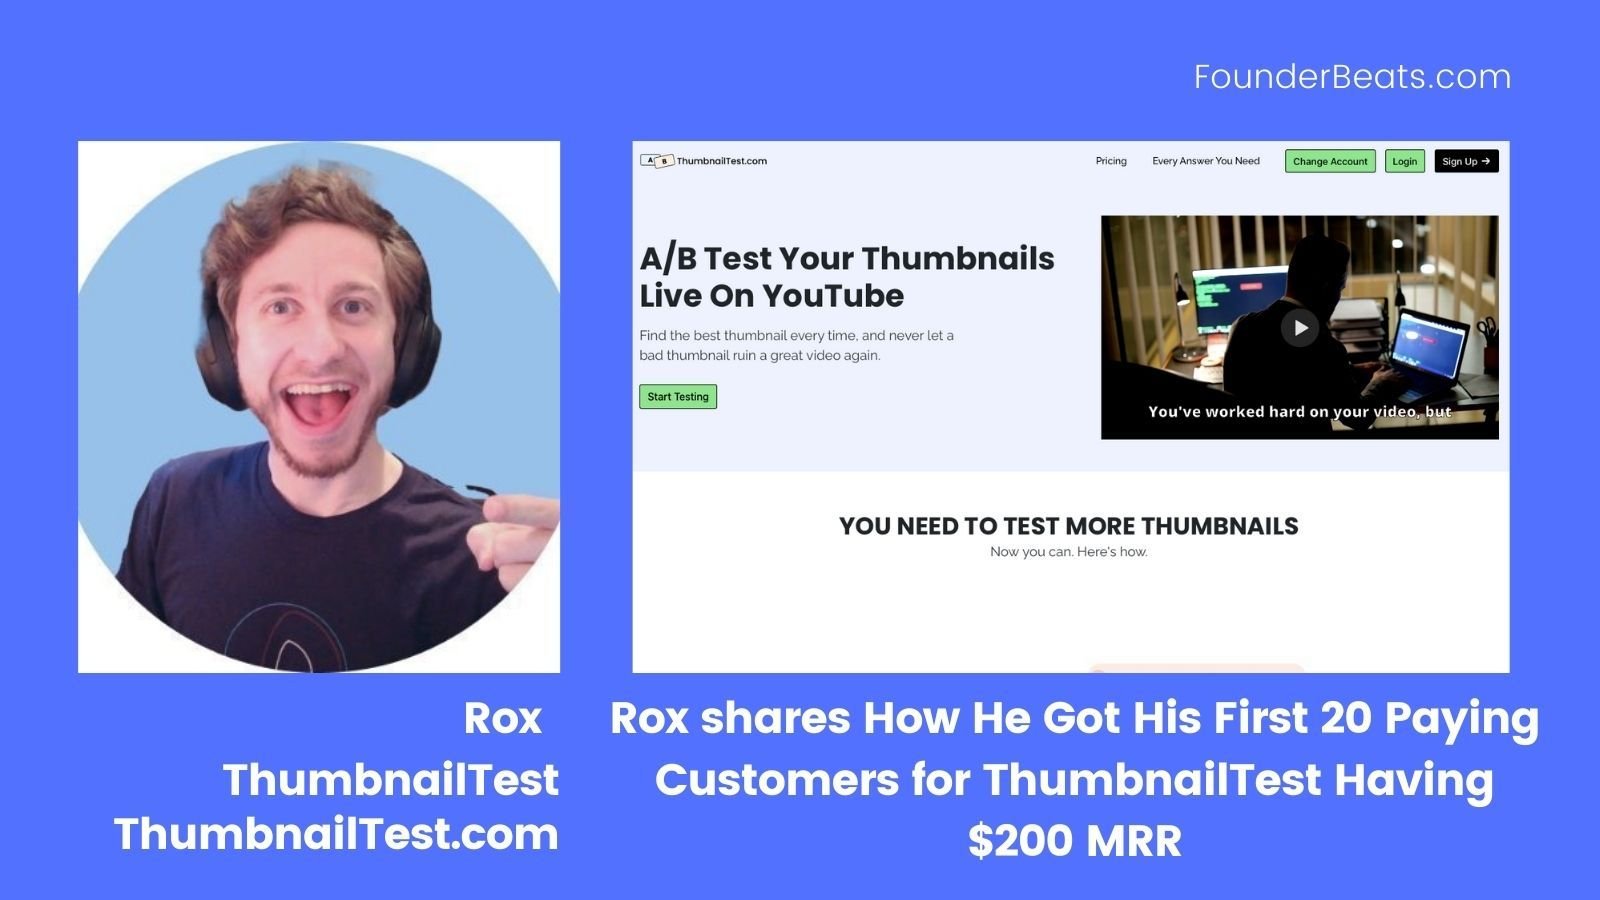 Rox shares How He Got His First 20 Paying Customers for ThumbnailTest Having  $200  MRR